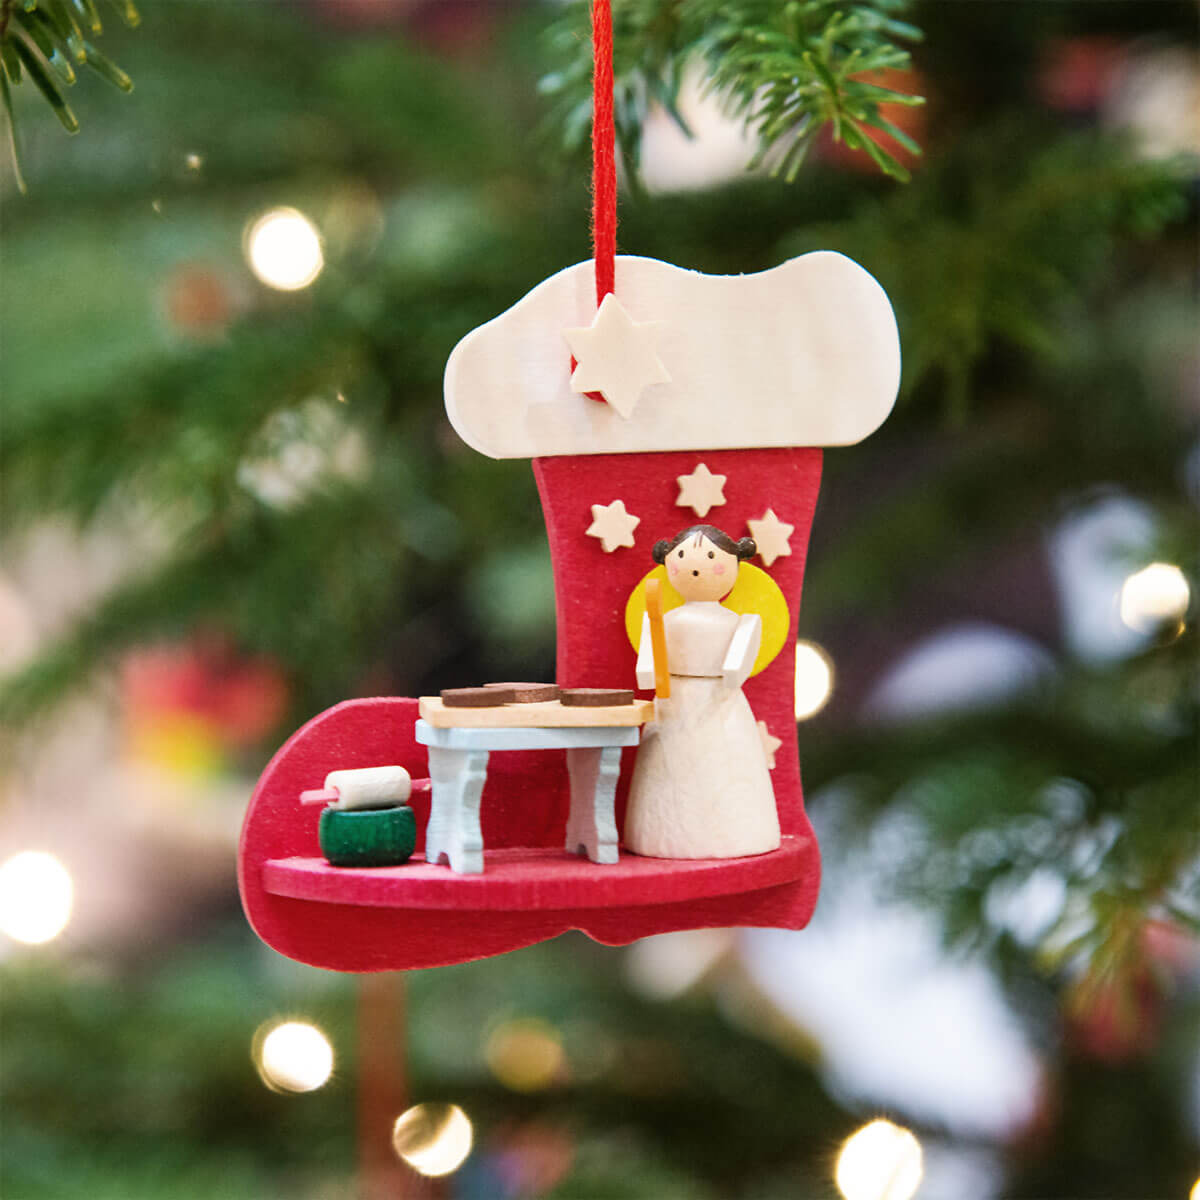 Boot 'Angel' Ornament with tricycle